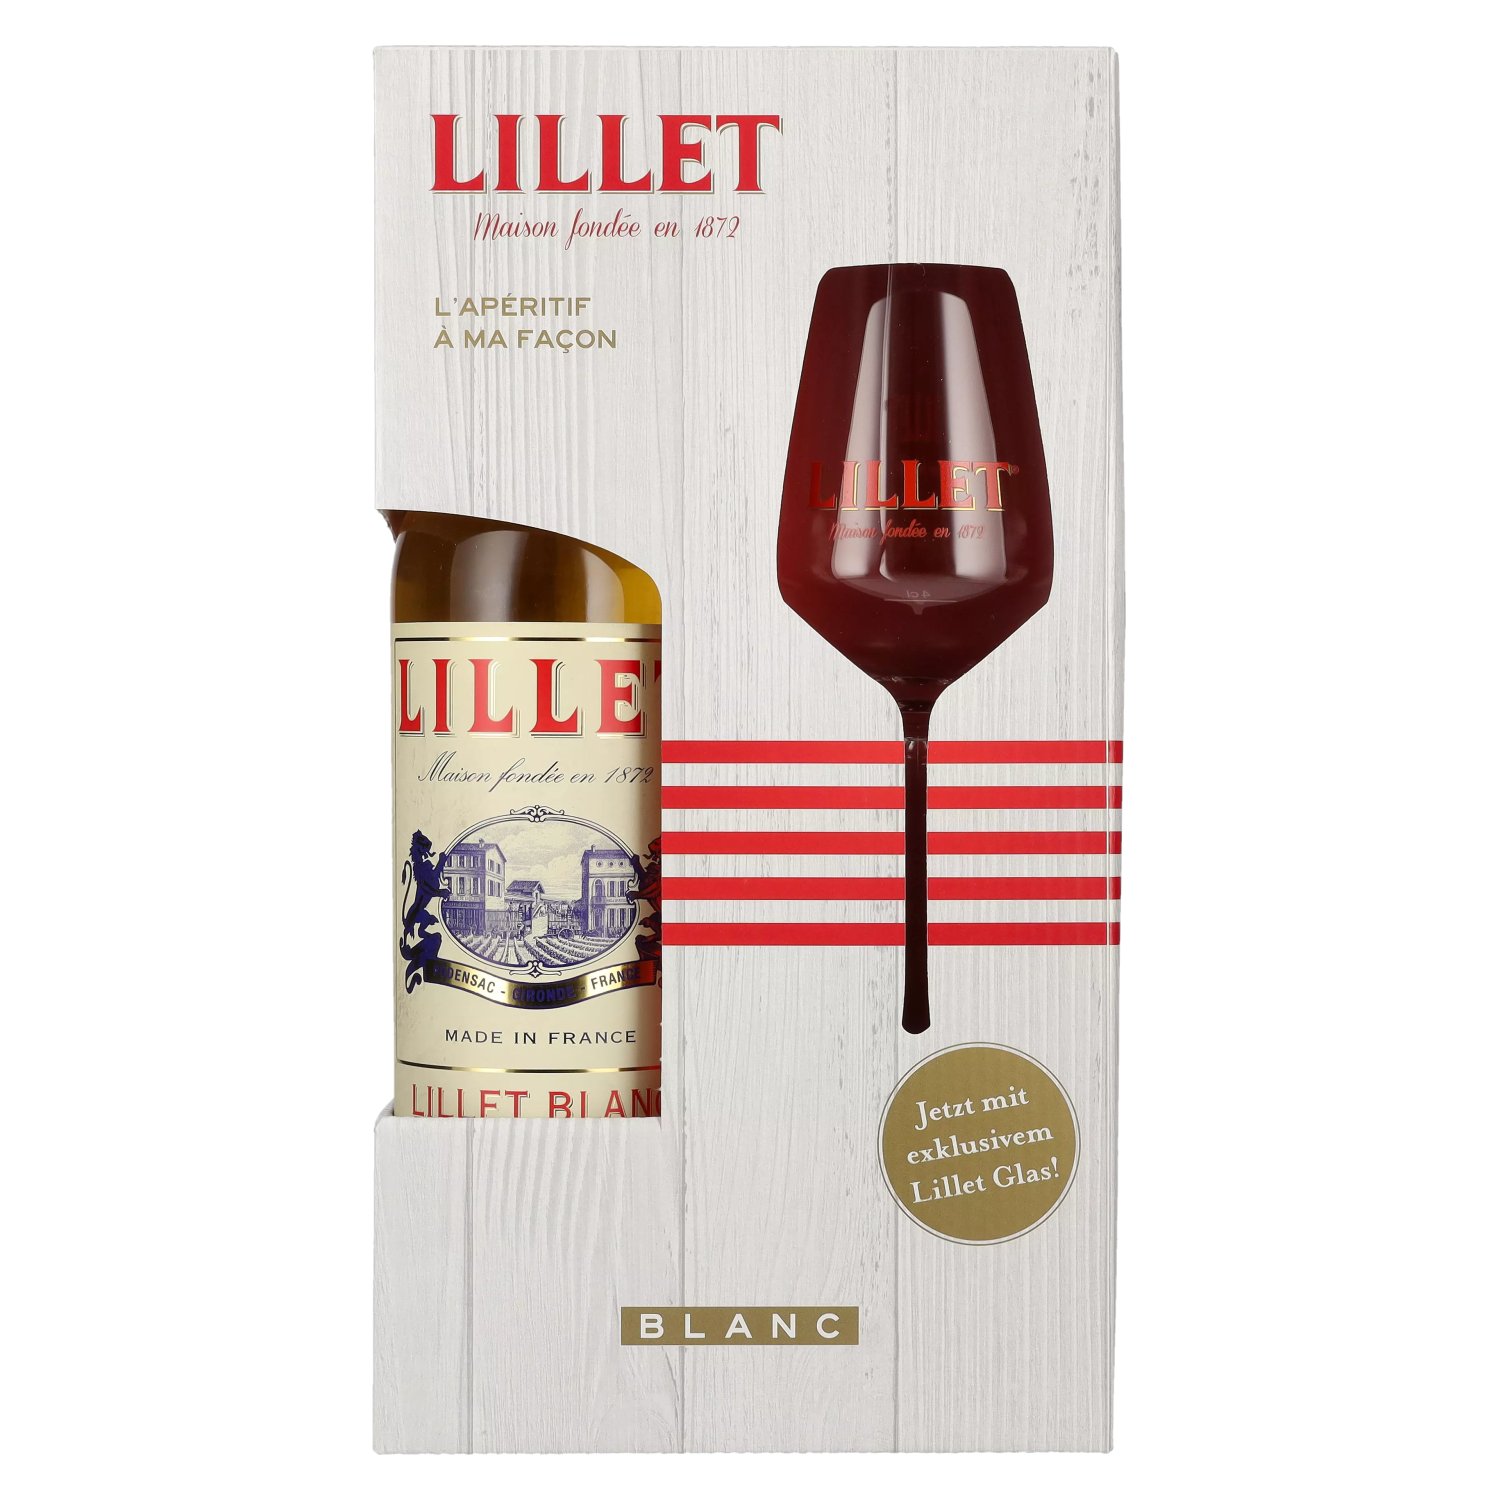 Lillet Giftbox 0,75l with Blanc 17% glass in Vol.